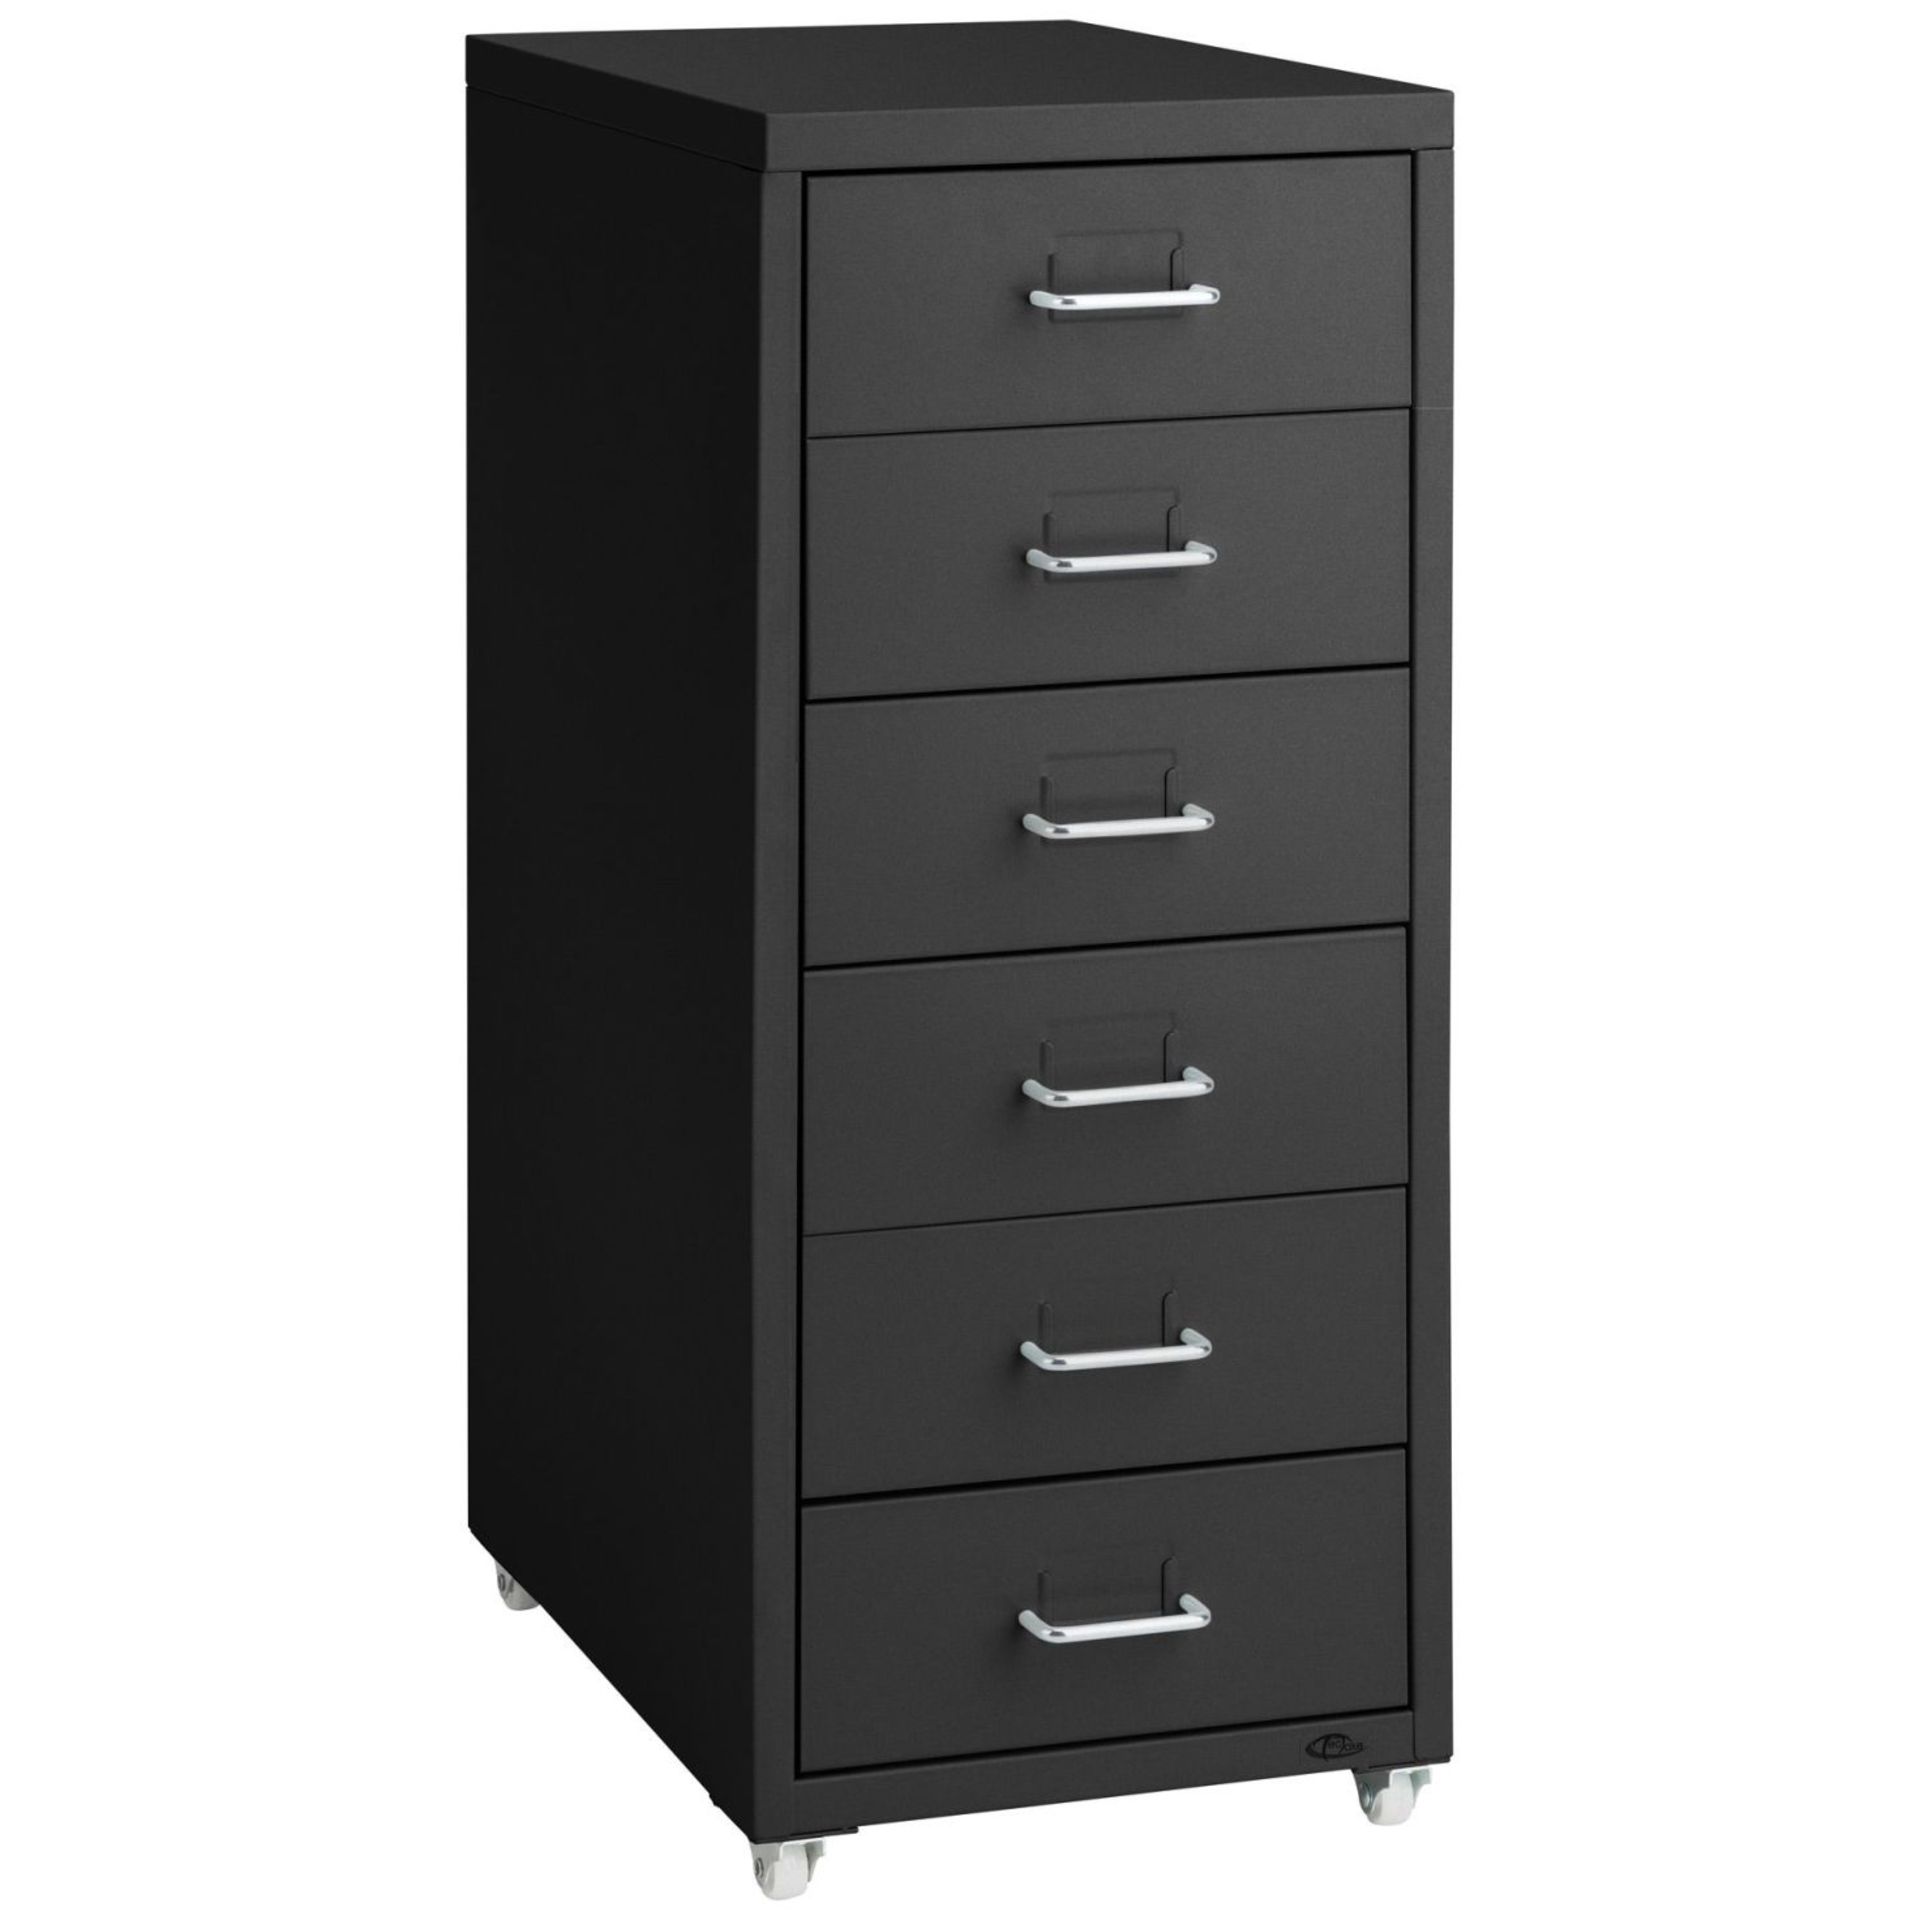 Tectake - Filing Cabinet On Casters - Metal Black - Boxed. RRP £75.99 - Image 2 of 2